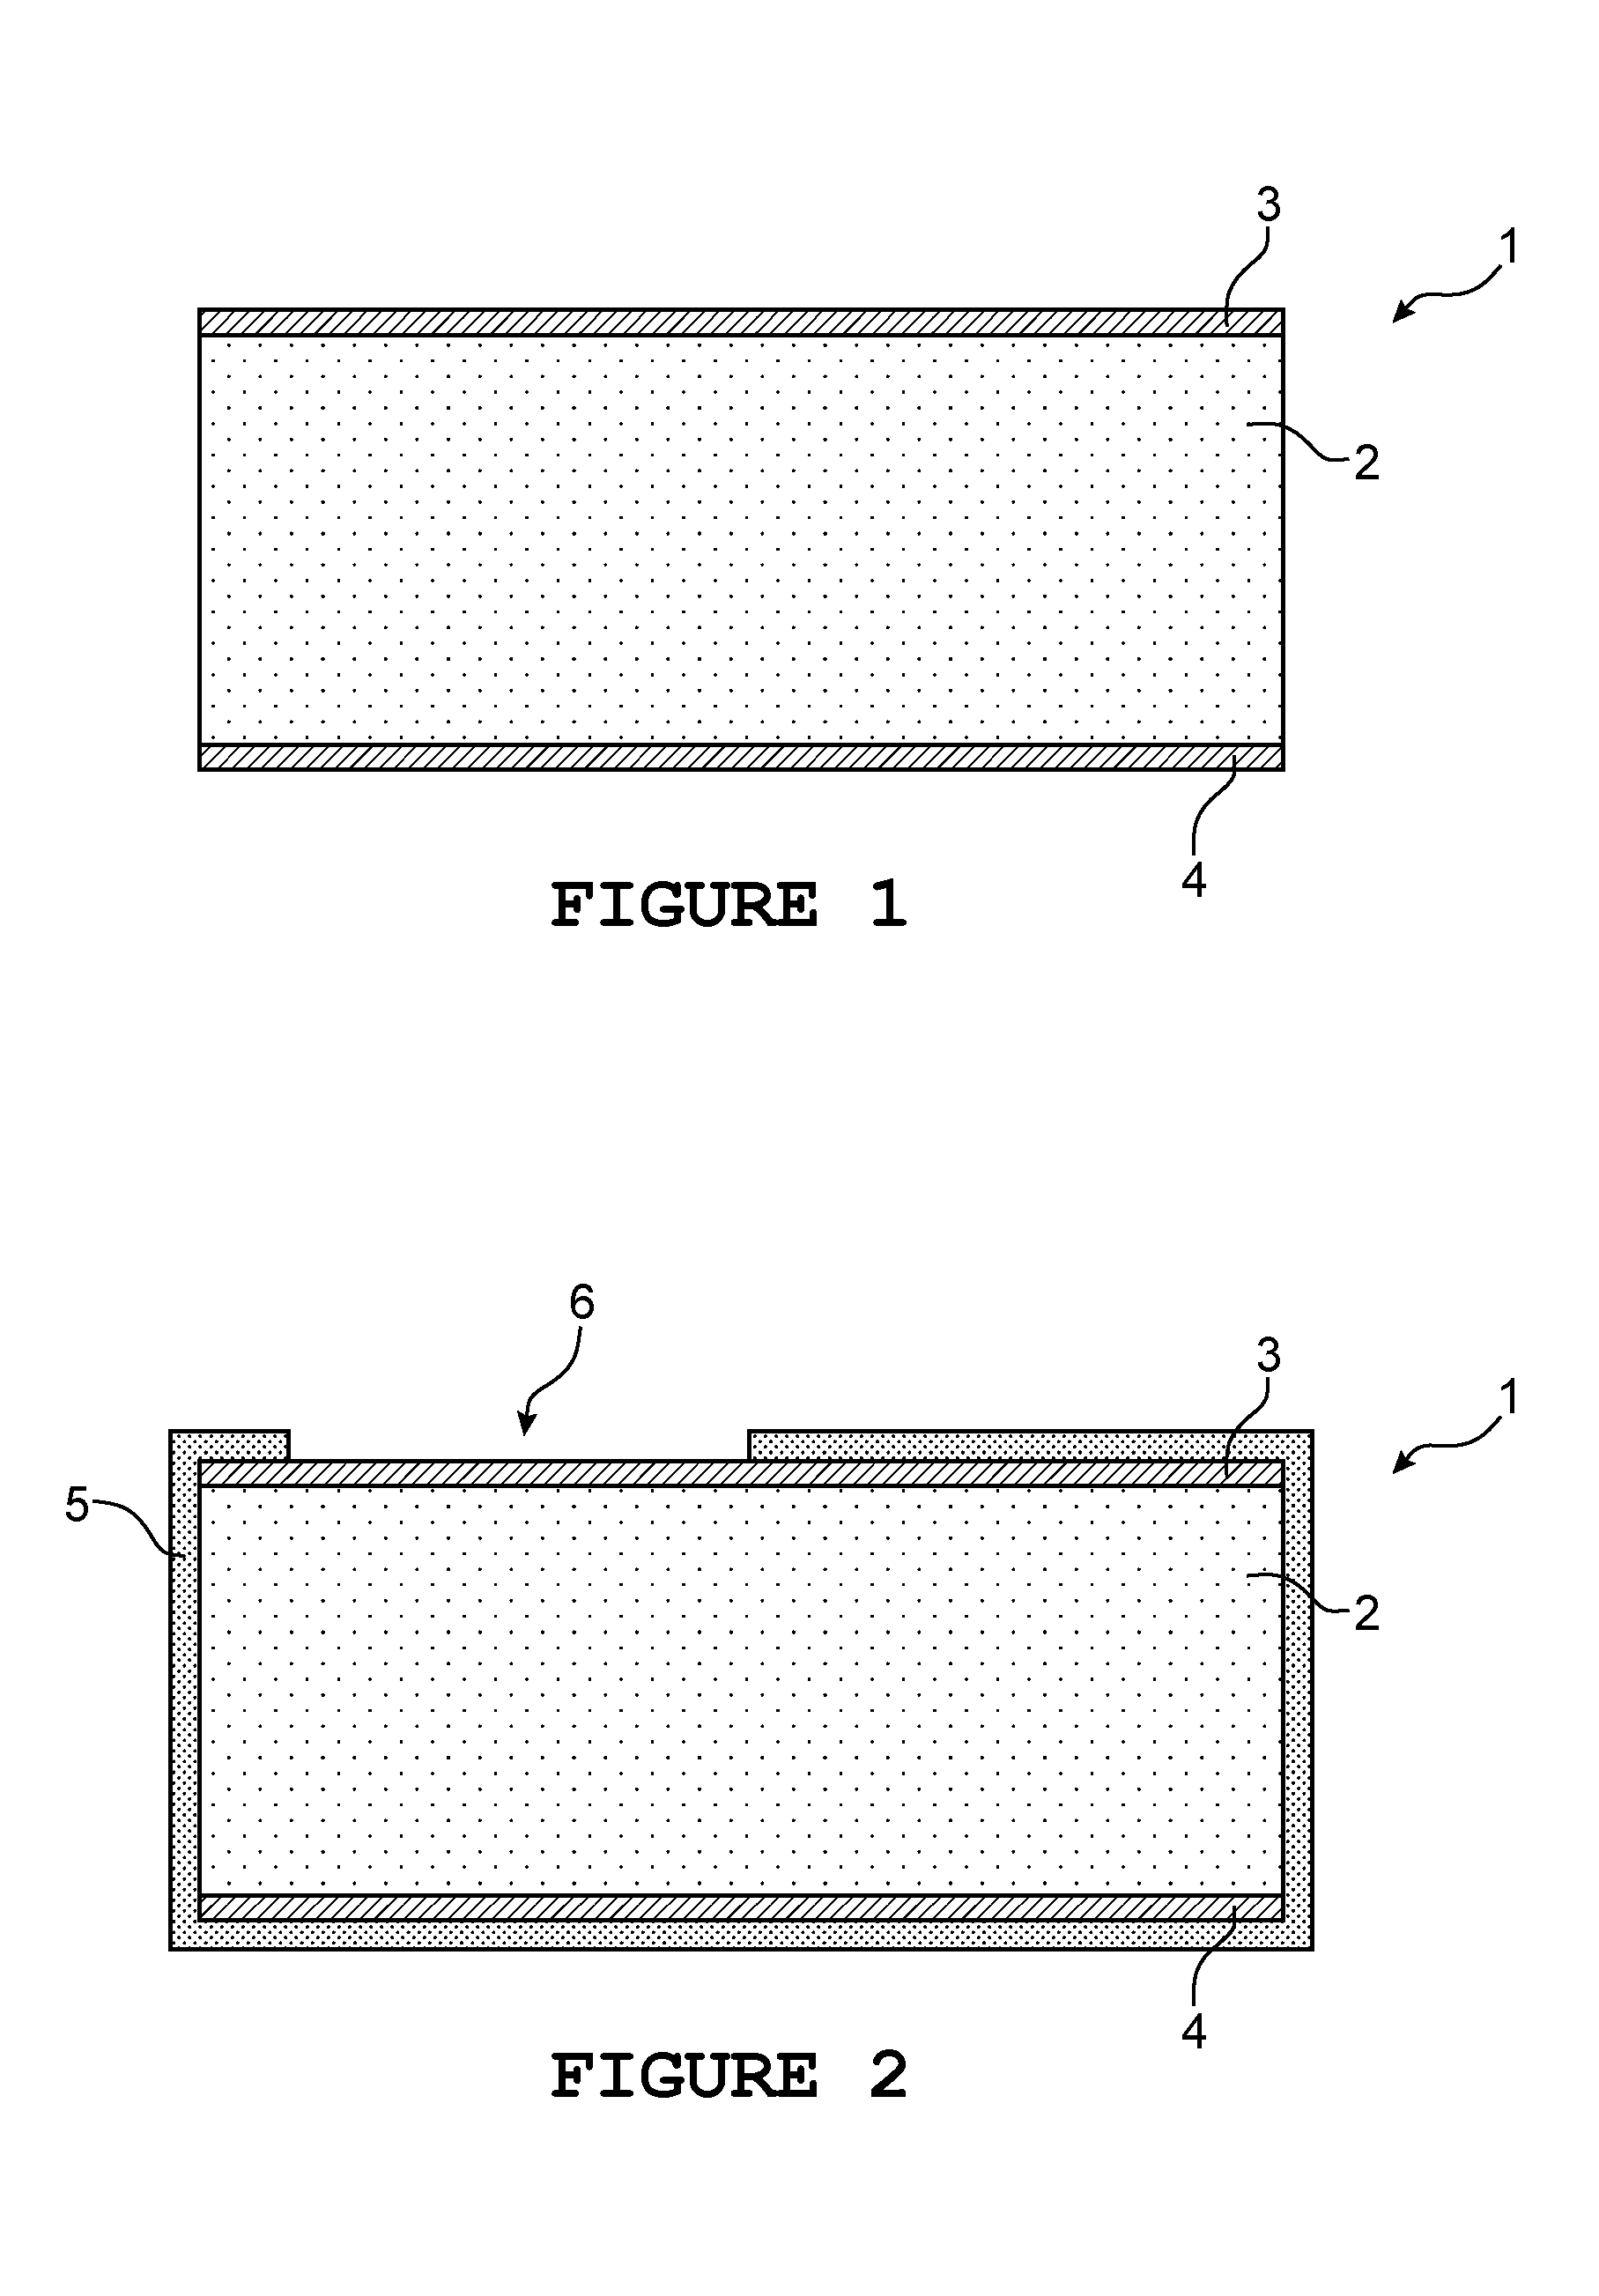 Detection method using an electrochemically-assisted alpha detector for nuclear measurement in a liquid medium